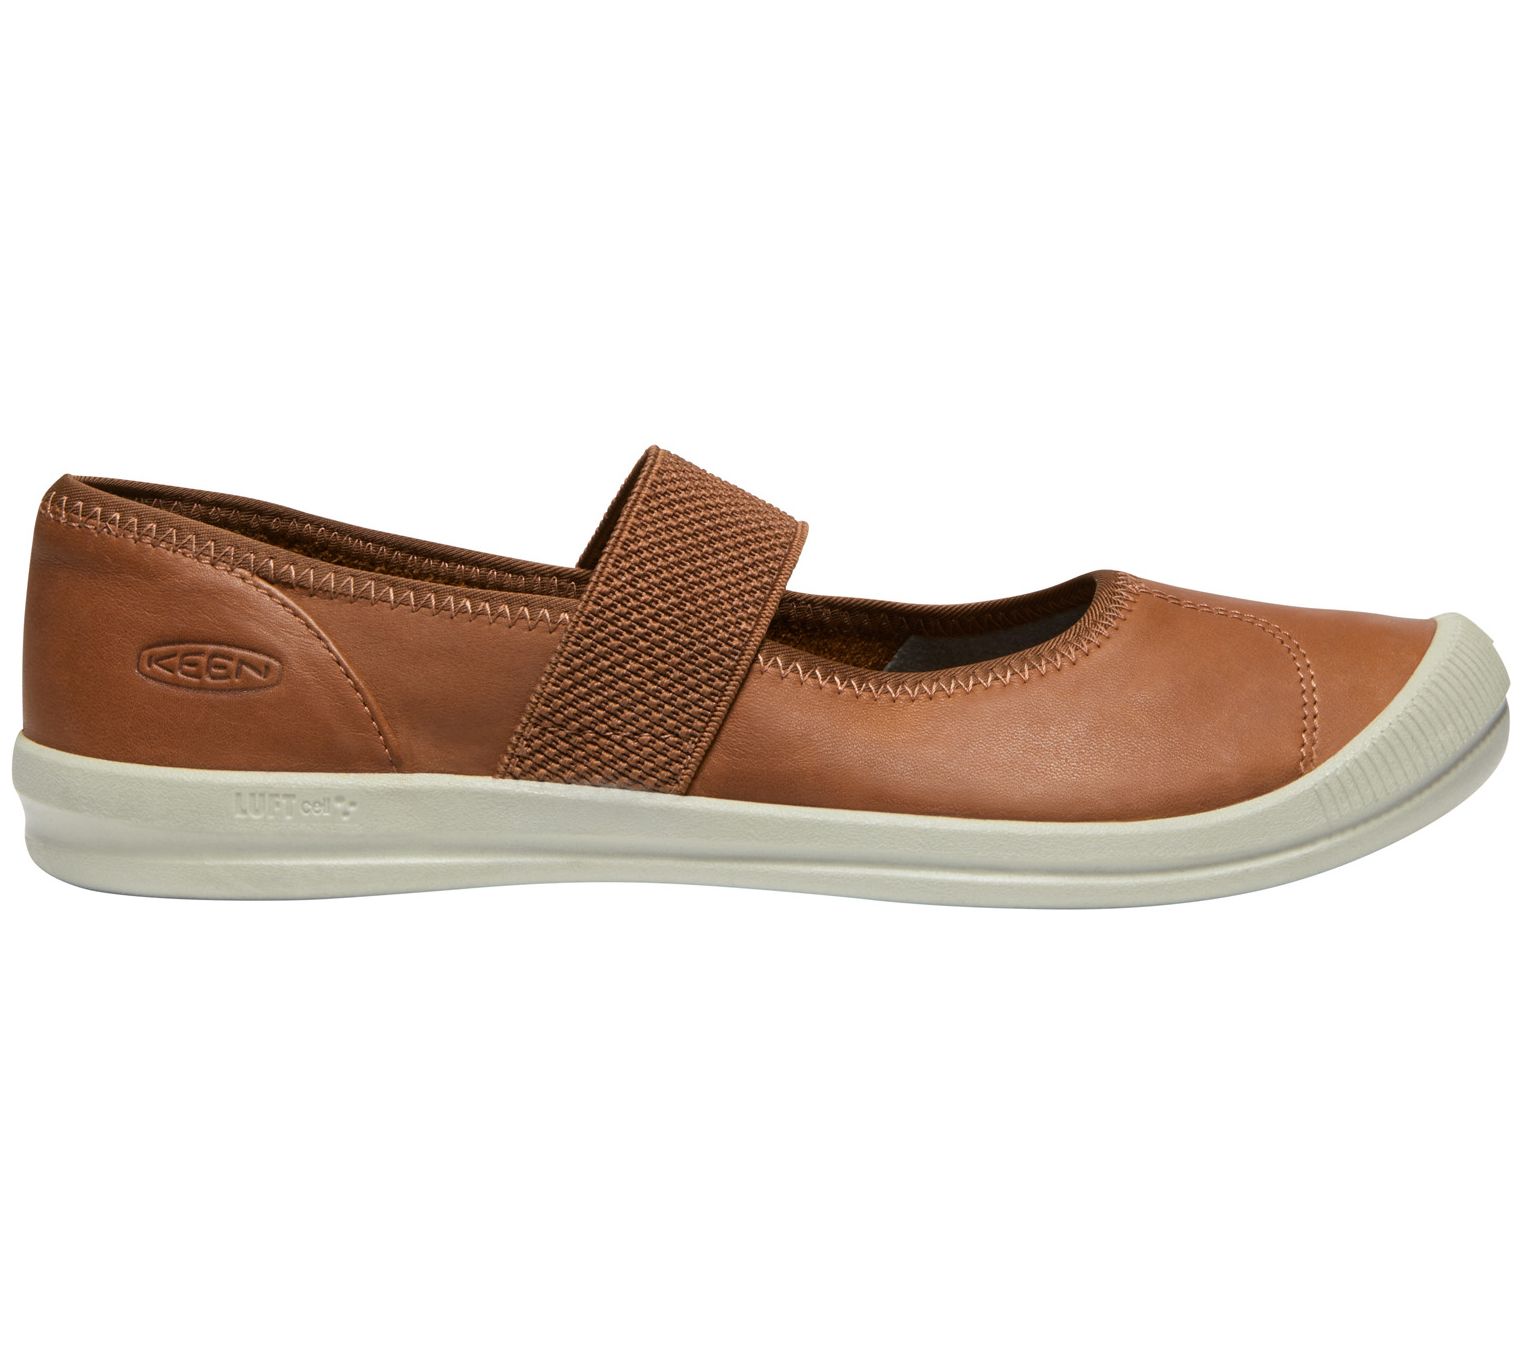 KEEN Leather Mary Jane Slip-on Shoes - Lorelai - QVC.com